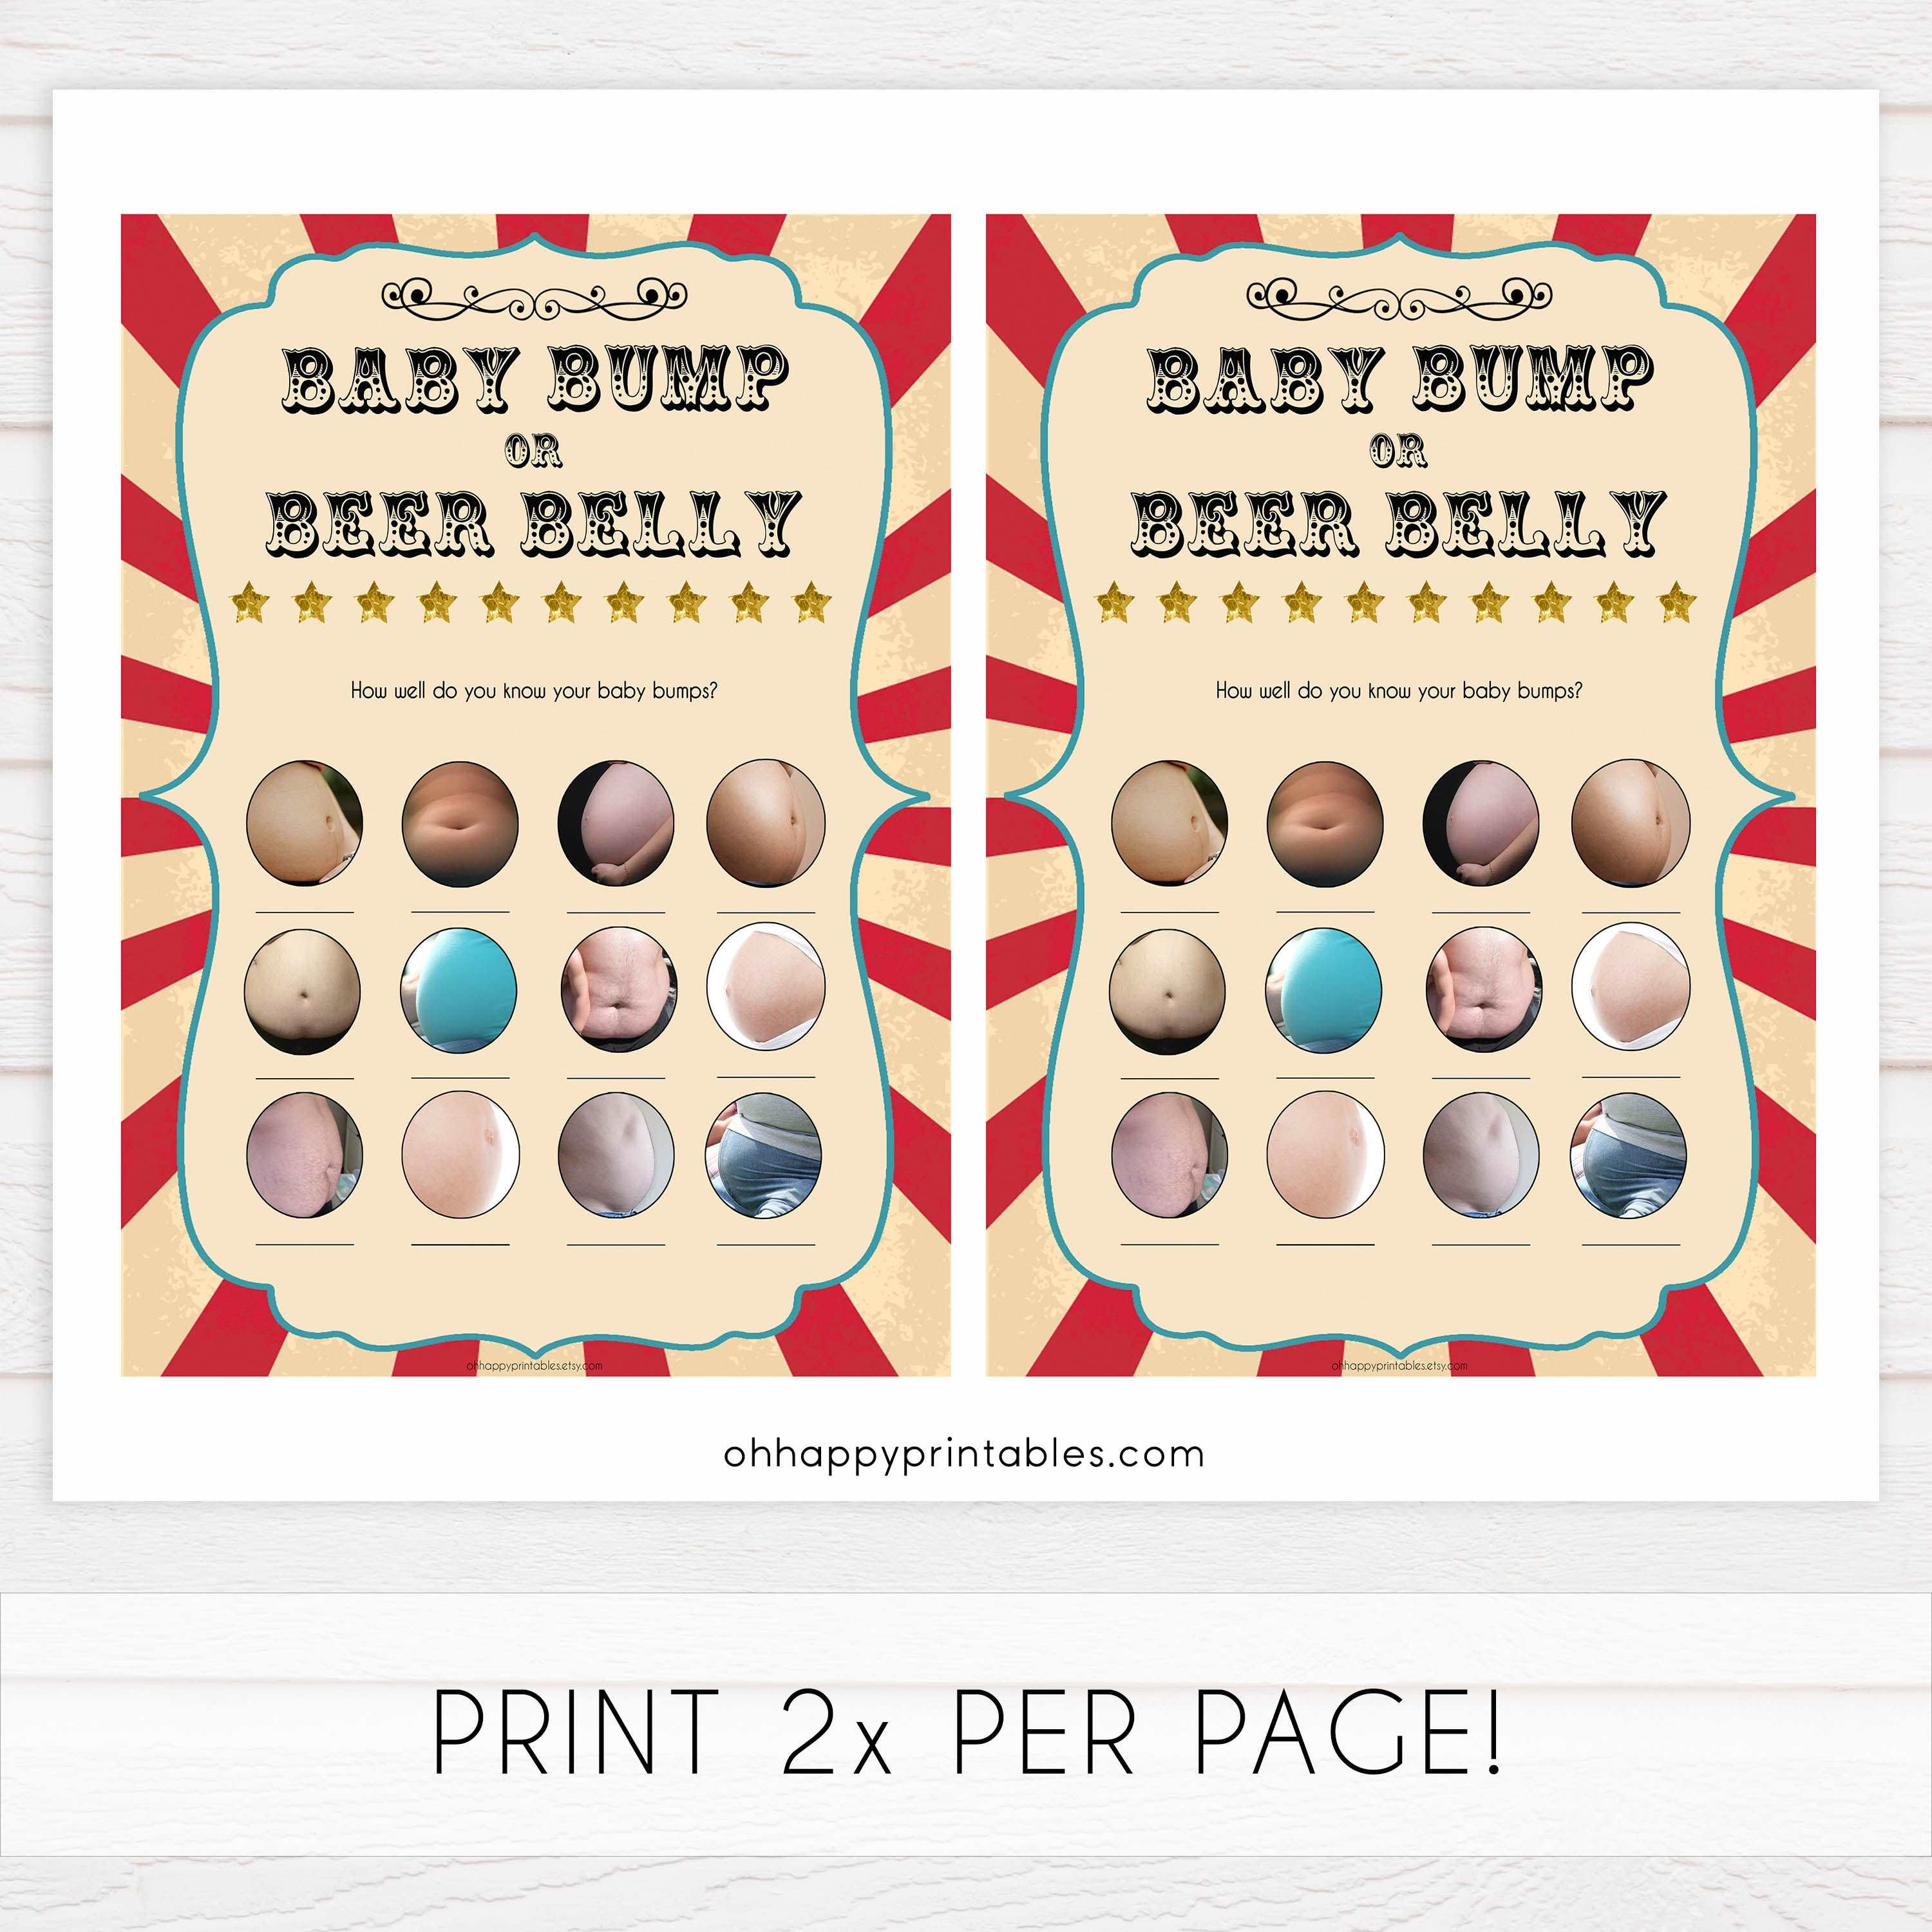 labor or porn, baby bump or beer belly game, Printable baby shower games, circus fun baby games, baby shower games, fun baby shower ideas, top baby shower ideas, carnival baby shower, circus baby shower ideas